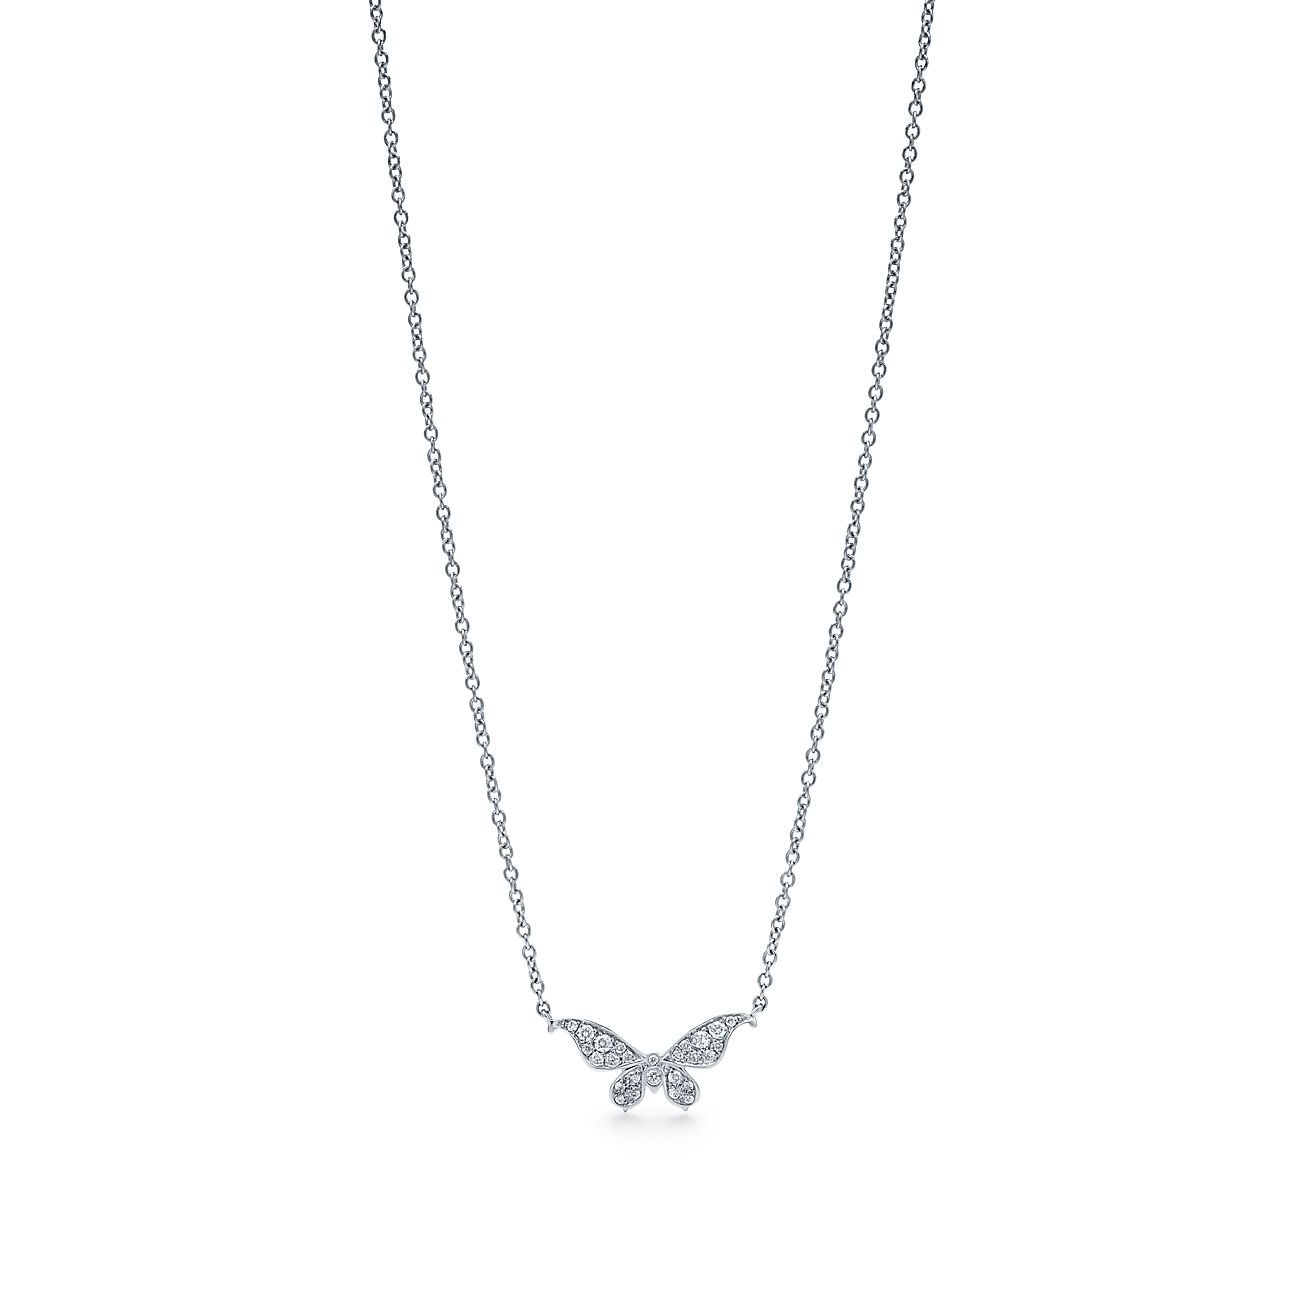 tiffany butterfly necklace gold